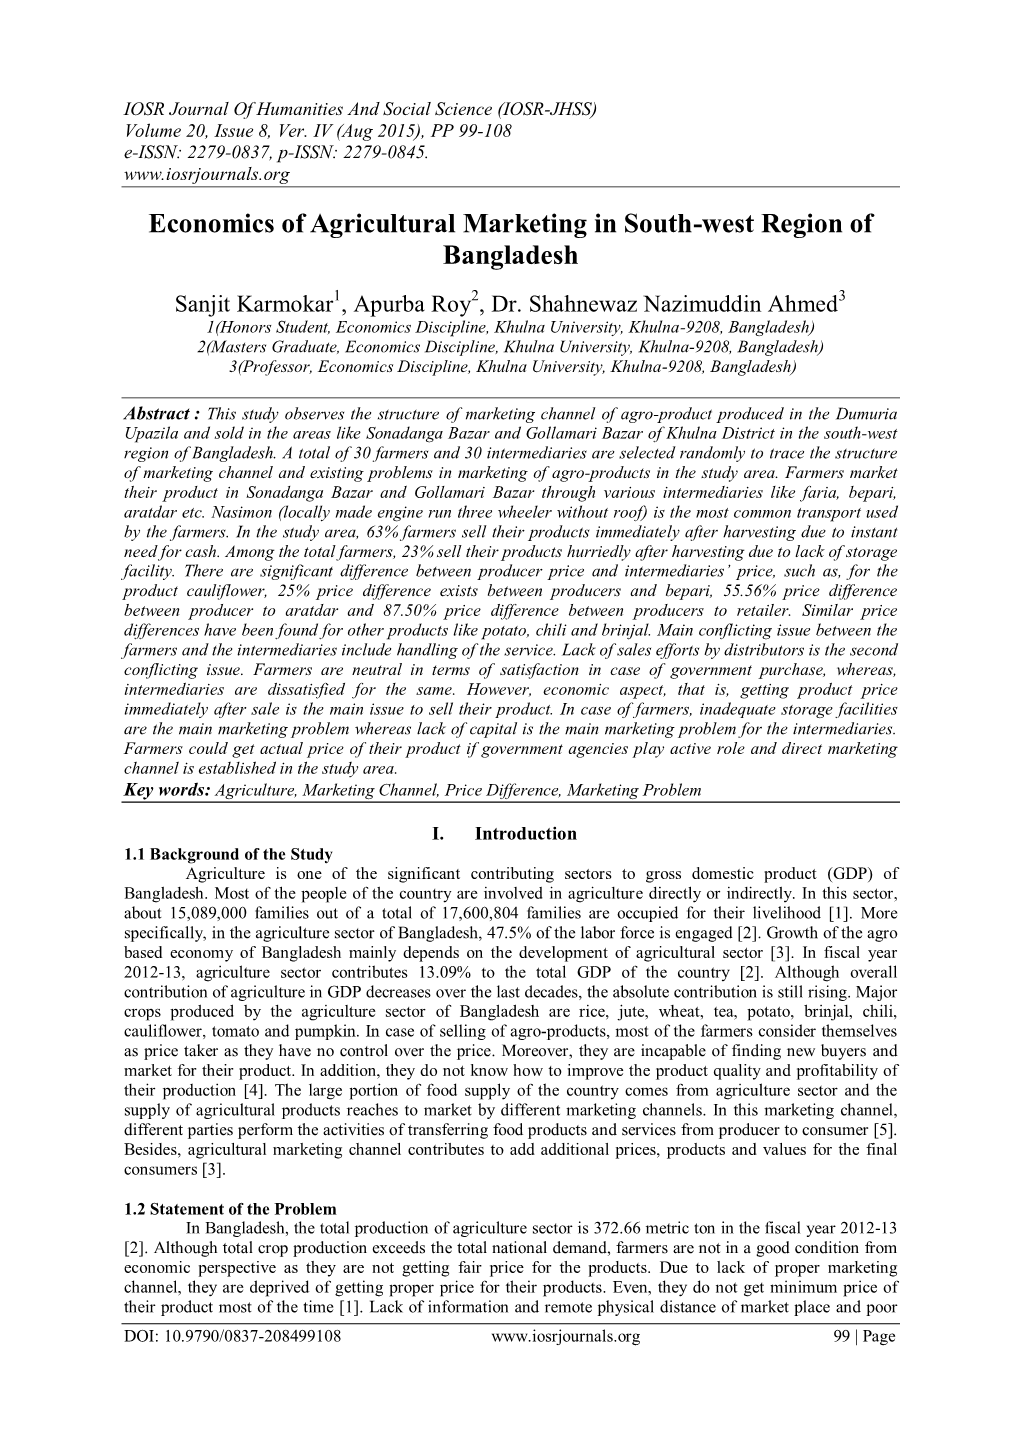 Economics of Agricultural Marketing in South-West Region of Bangladesh